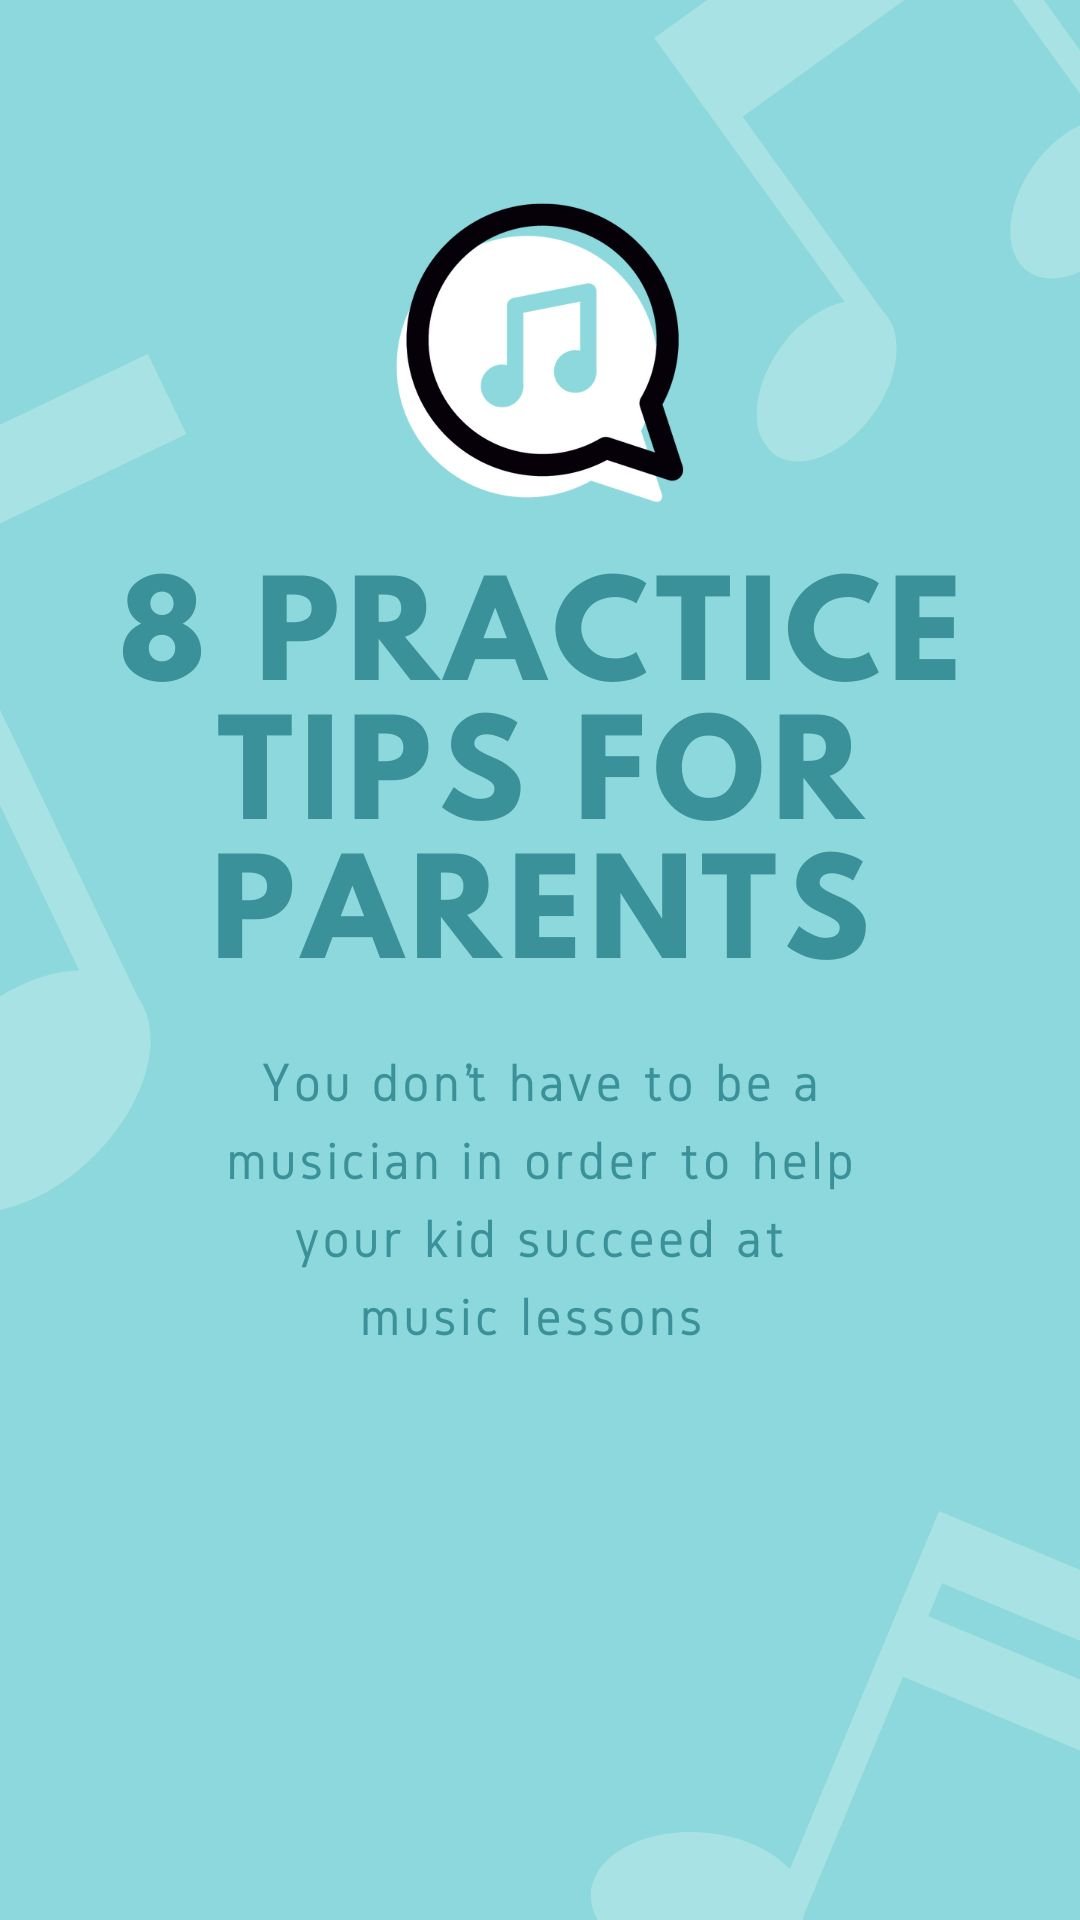  8 Practice Tips for Parents  You don’t have to be a musician in order to help your kid succeed in music lessons. 